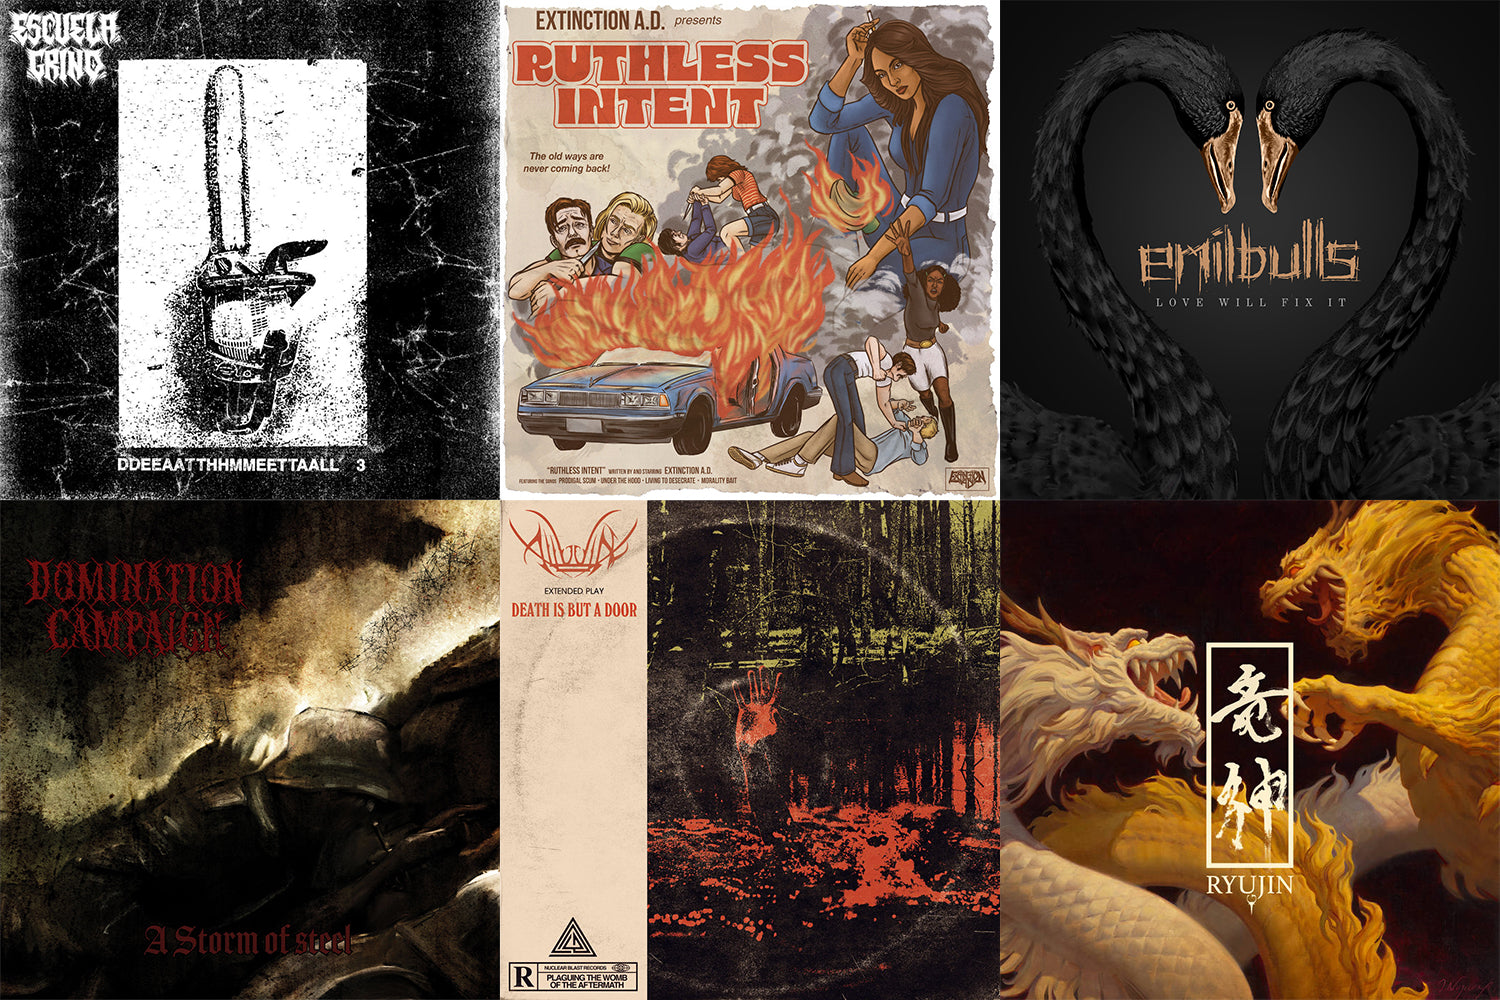 New Flesh 1/12: Ryujin, Escuela Grind, Extinction A.D. and MORE!